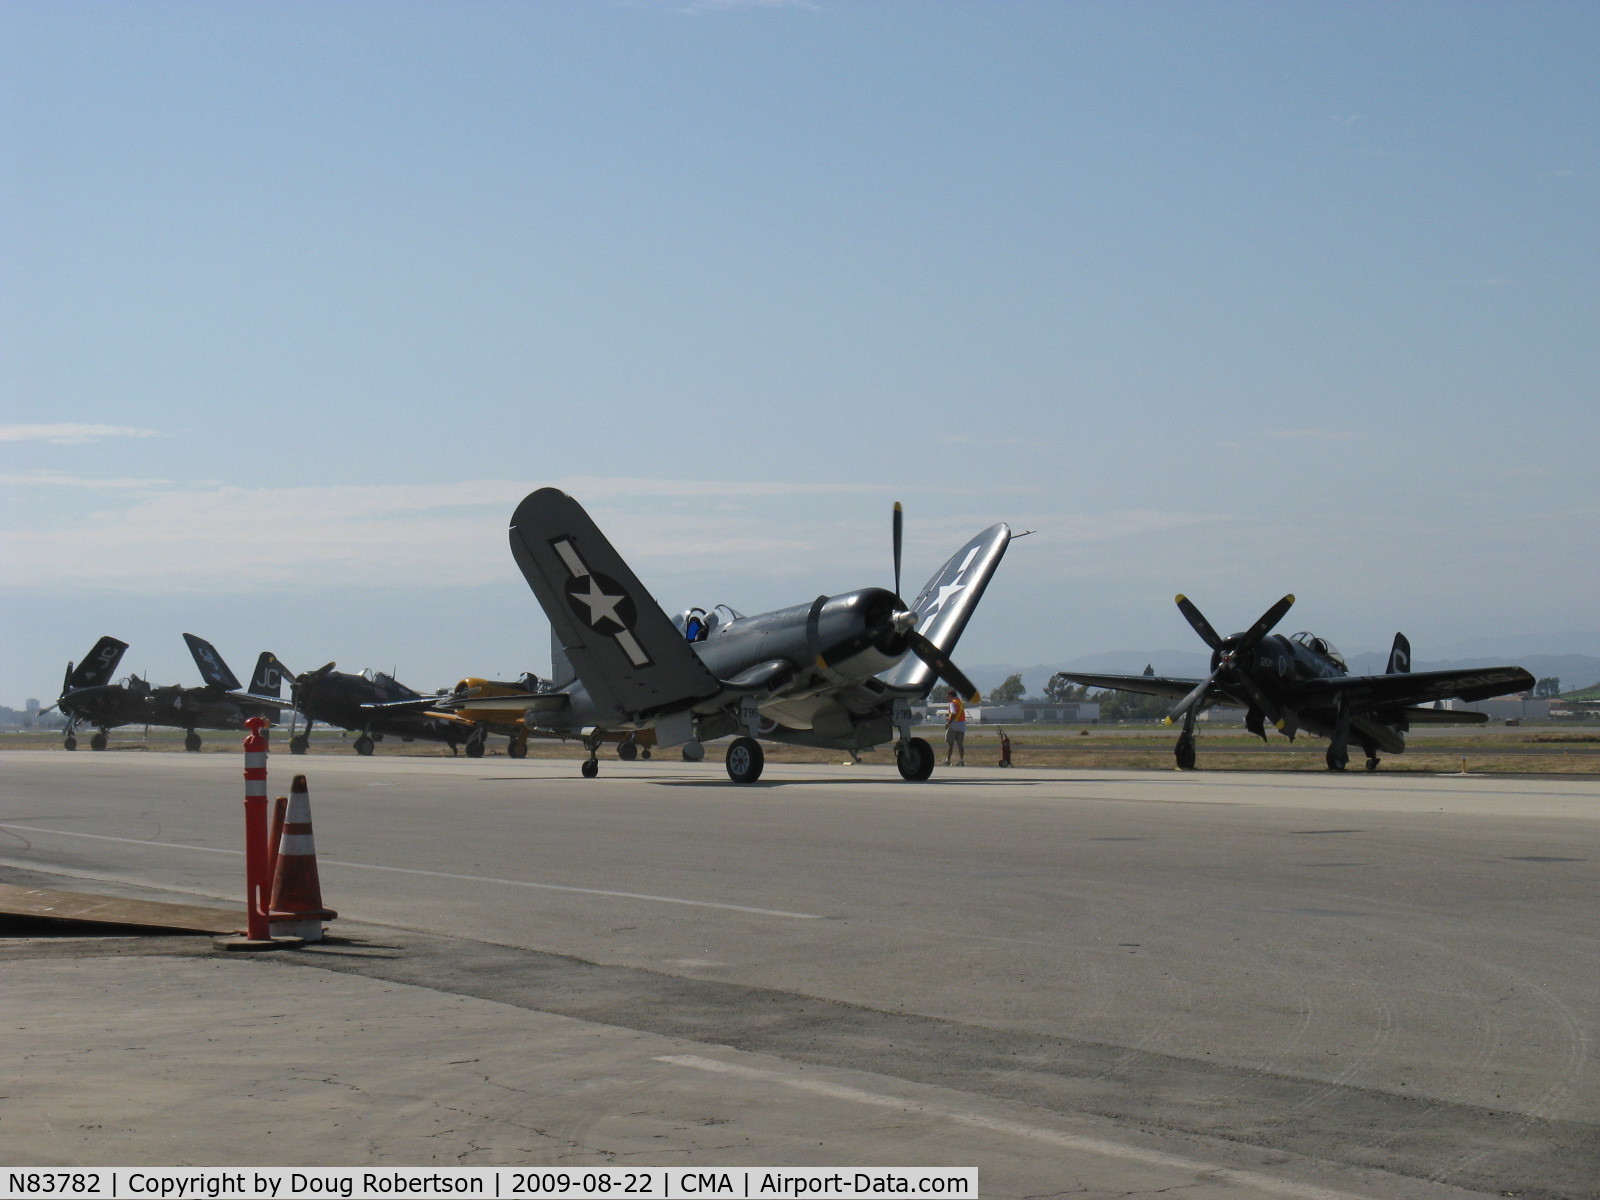 N83782, 1942 Vought F4U-1 Corsair C/N 3884 (Bu 17799), 1942 Chance Vought/Maloney F4U-1A CORSAIR, P&W R-2800 Double Wasp 2,450 Hp, taxi with wings unfolding-she wants to fly